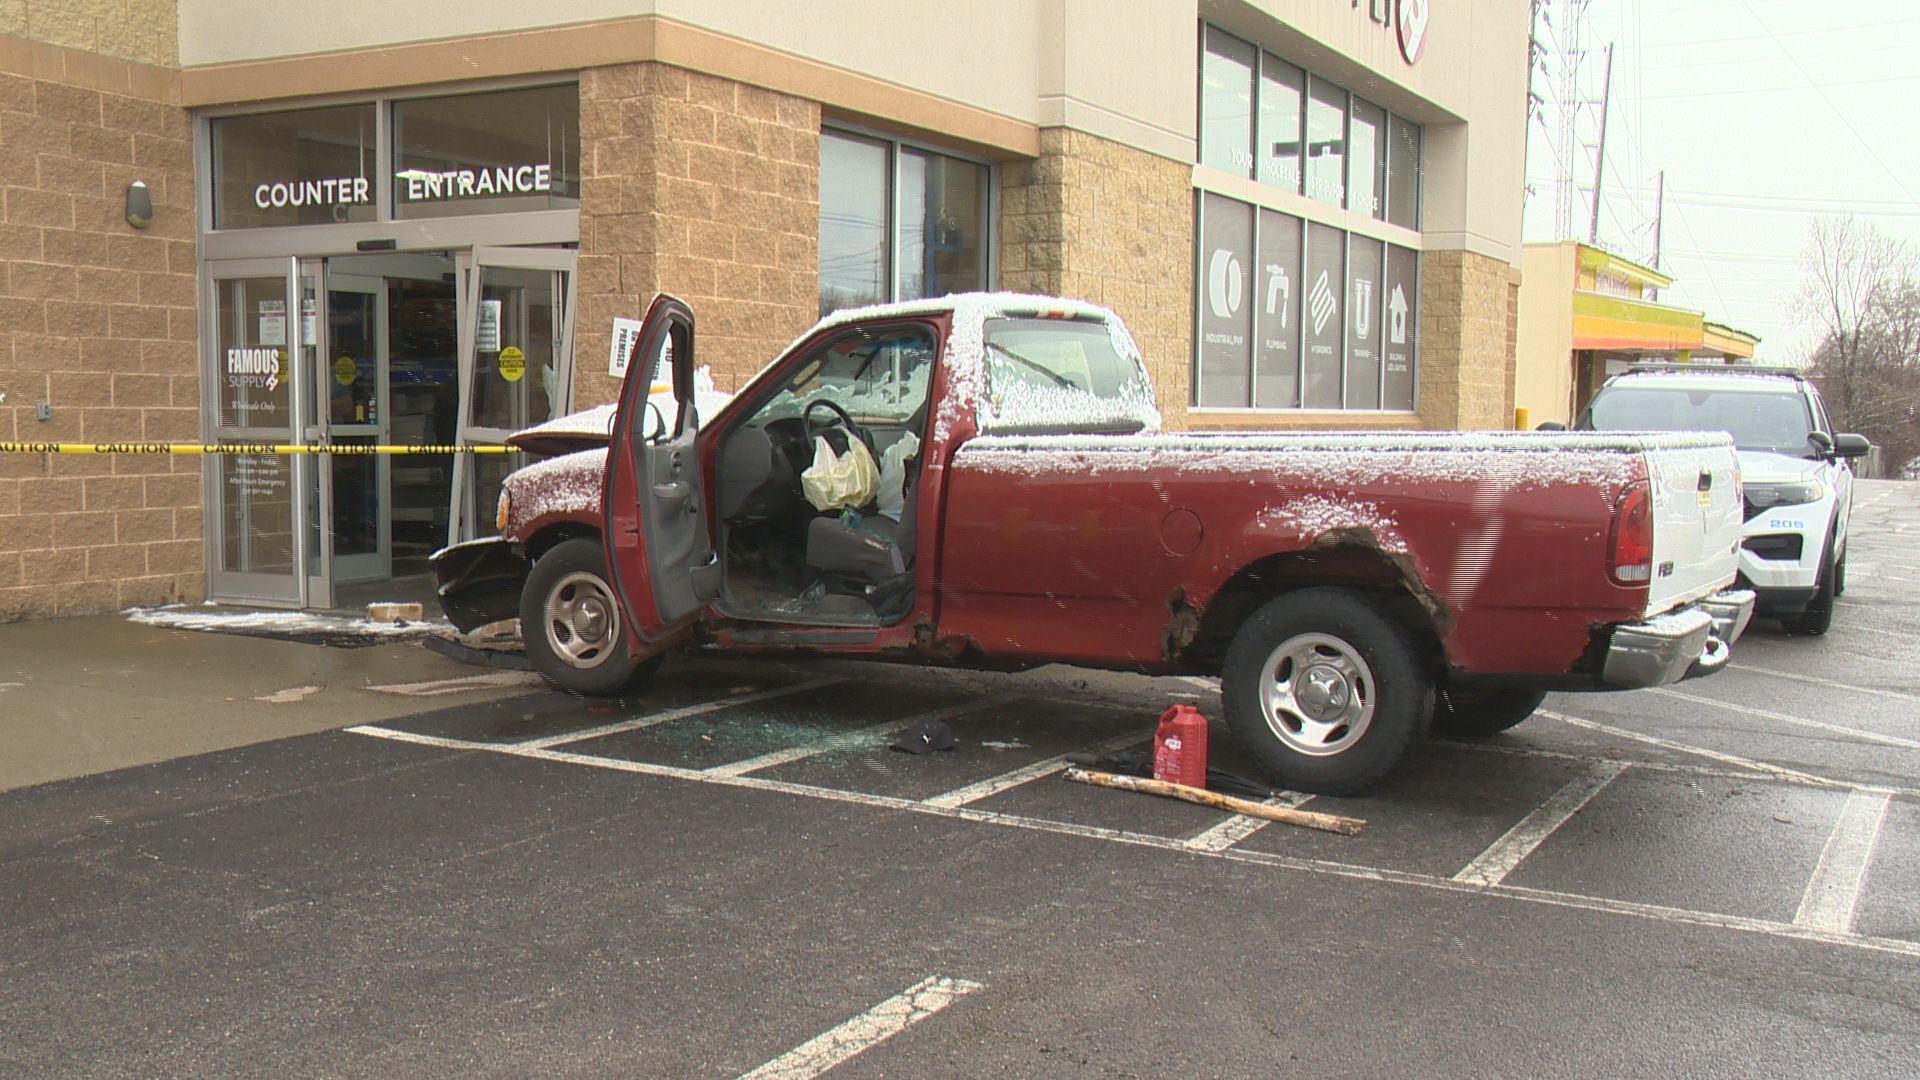 Youngstown business damaged after pickup truck crashes due to suspected medical episode